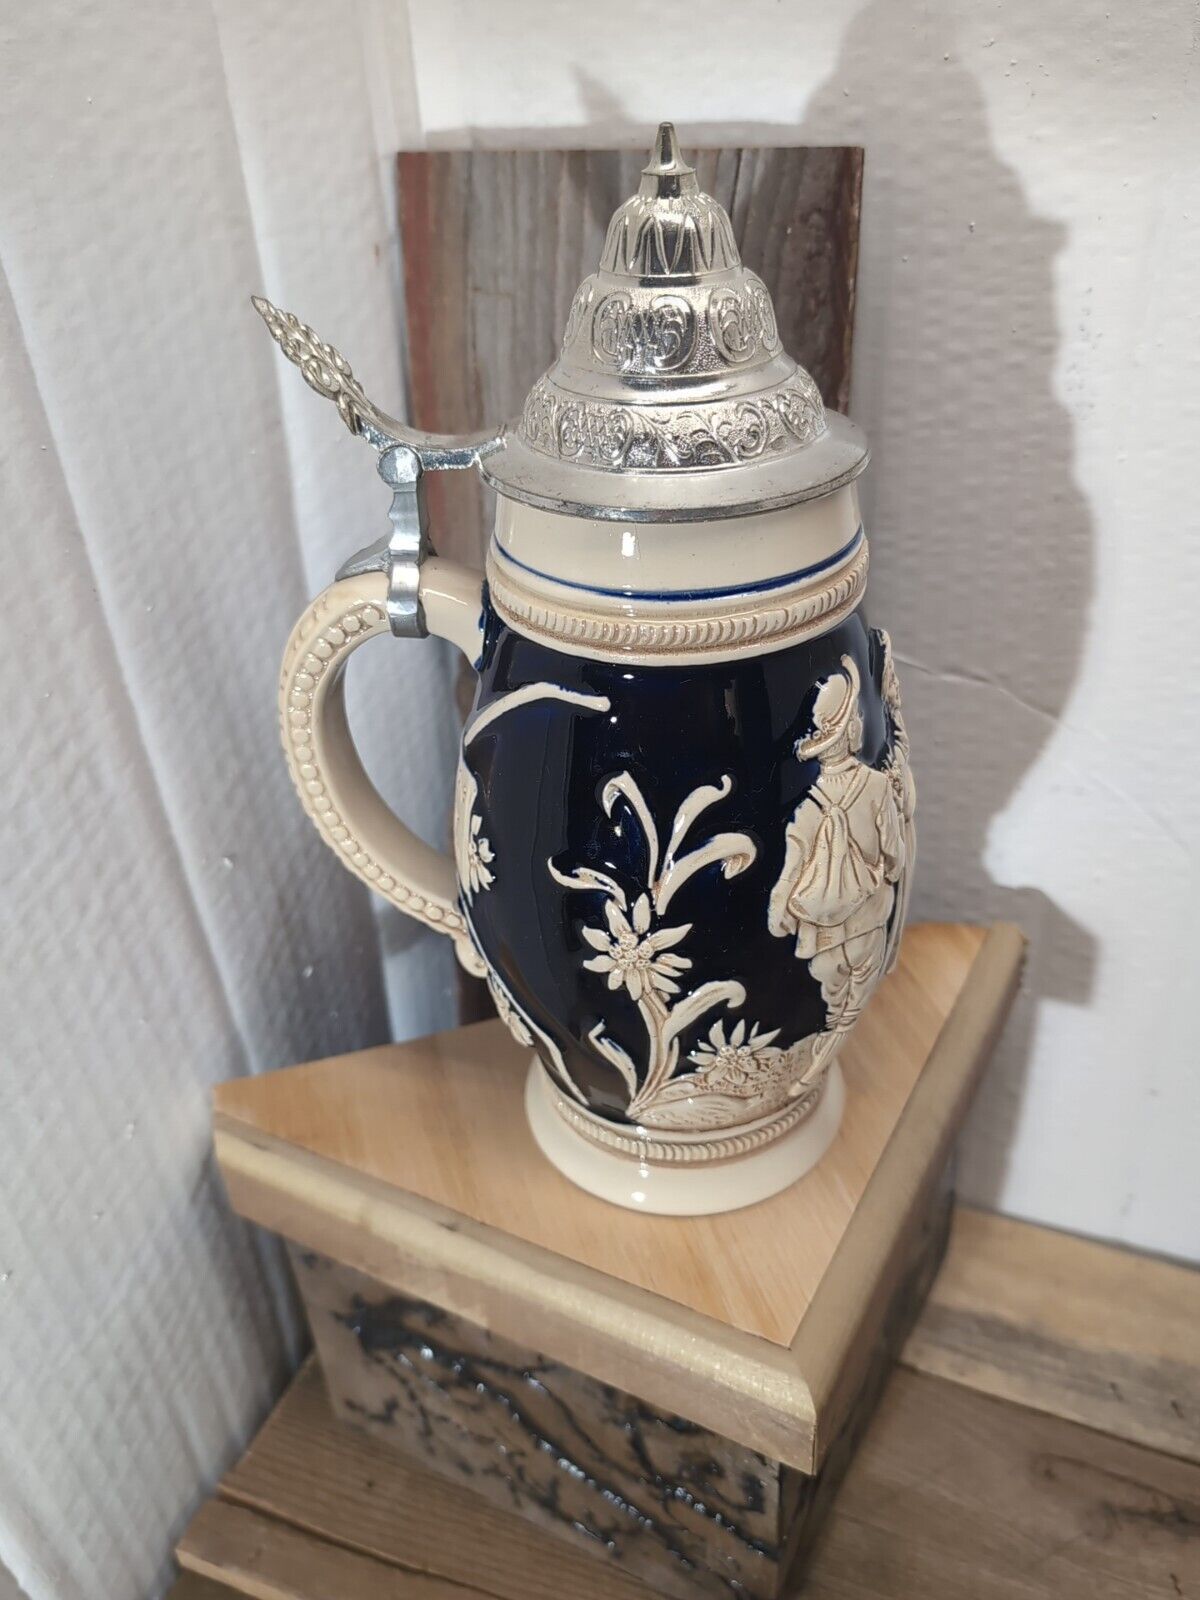 VTG Marzi & Remy 2350 Typrleans Outdoors Lidded German Beer Stein Collectible